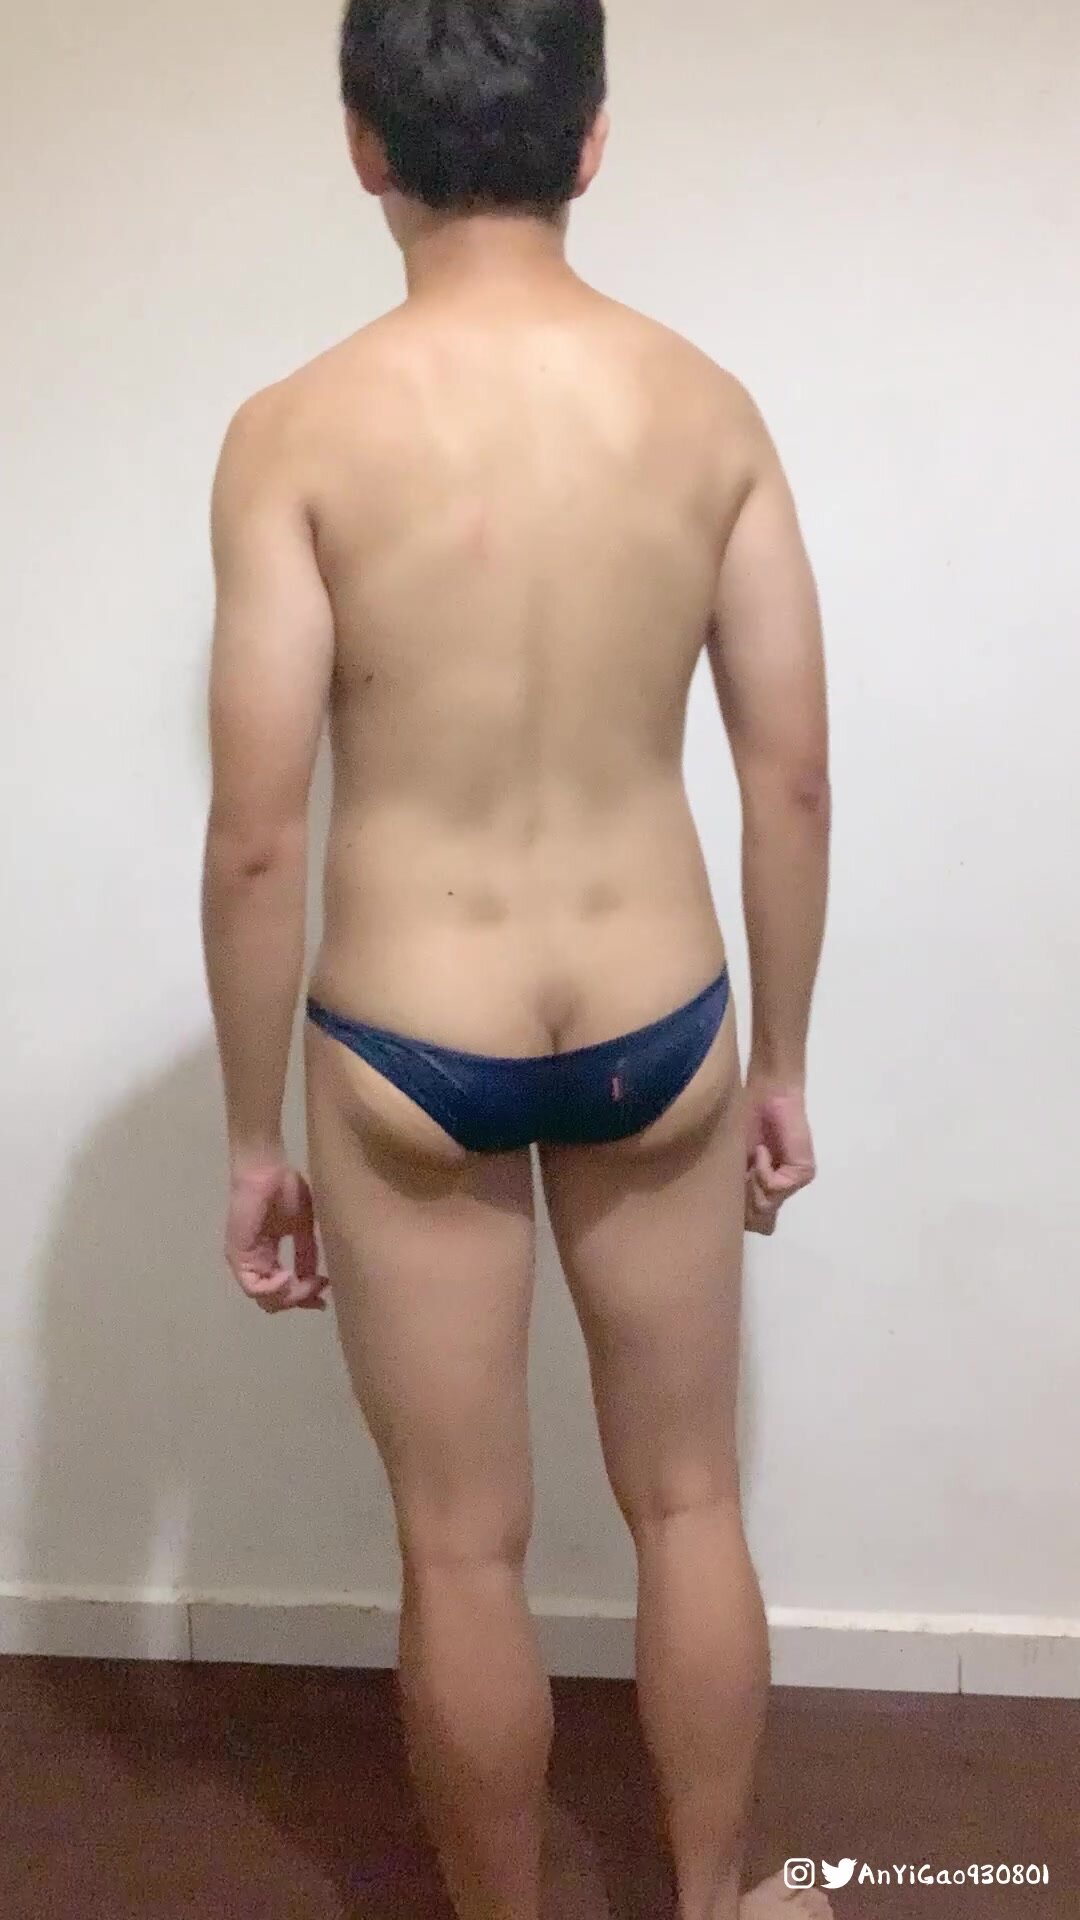 Asian boy gets horny and shows off his body